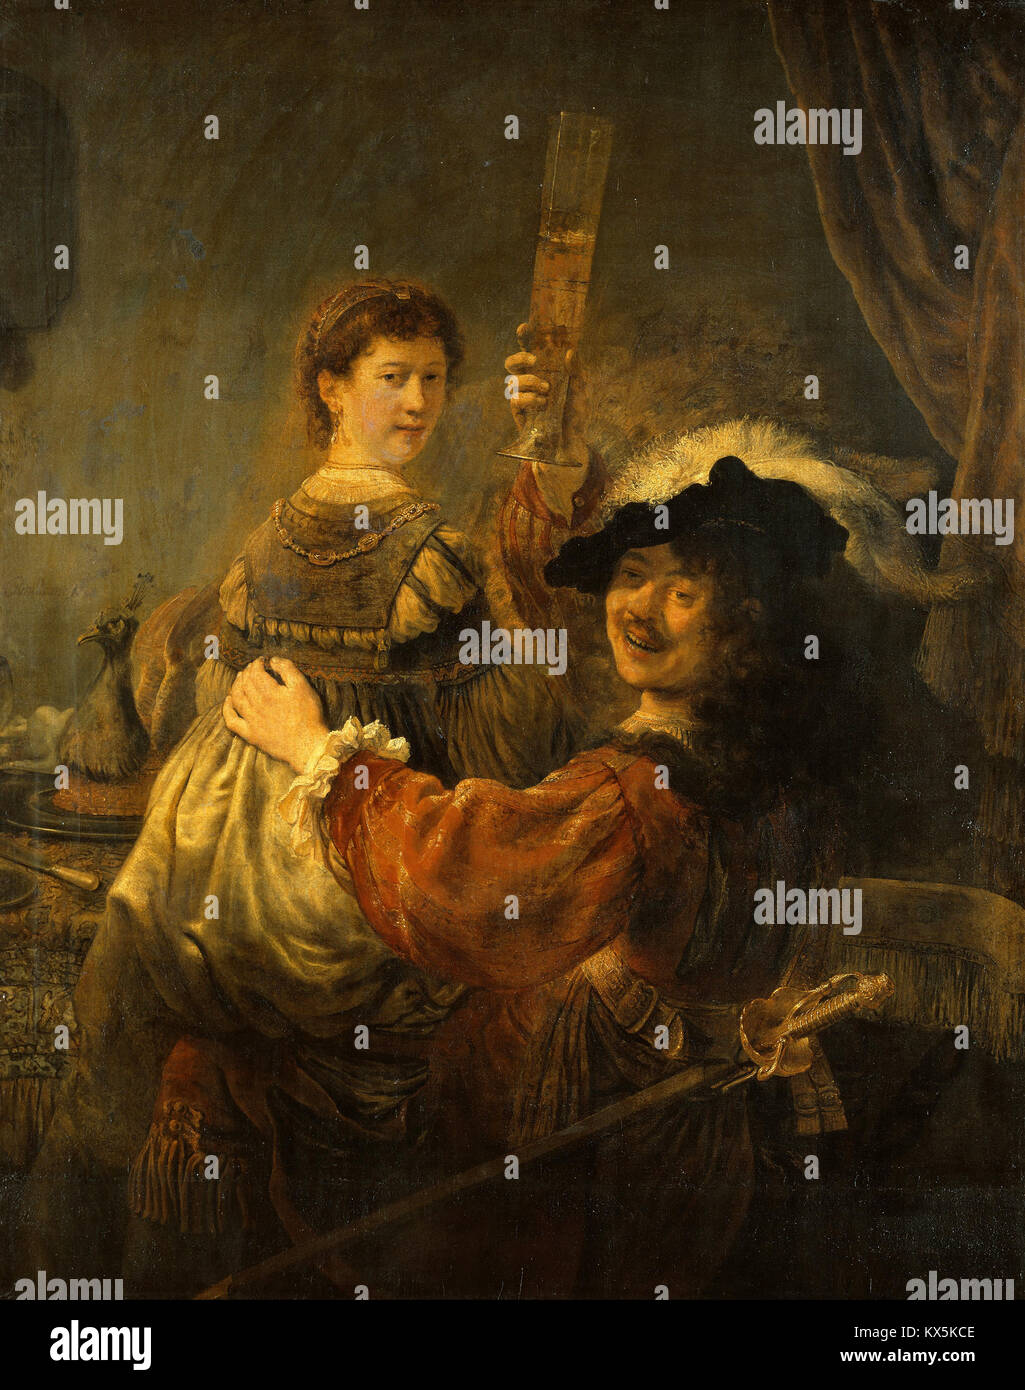 The Prodigal Son in the Tavern, a self-portrait with Saskia, c. 1635 by Rembrandt Stock Photo